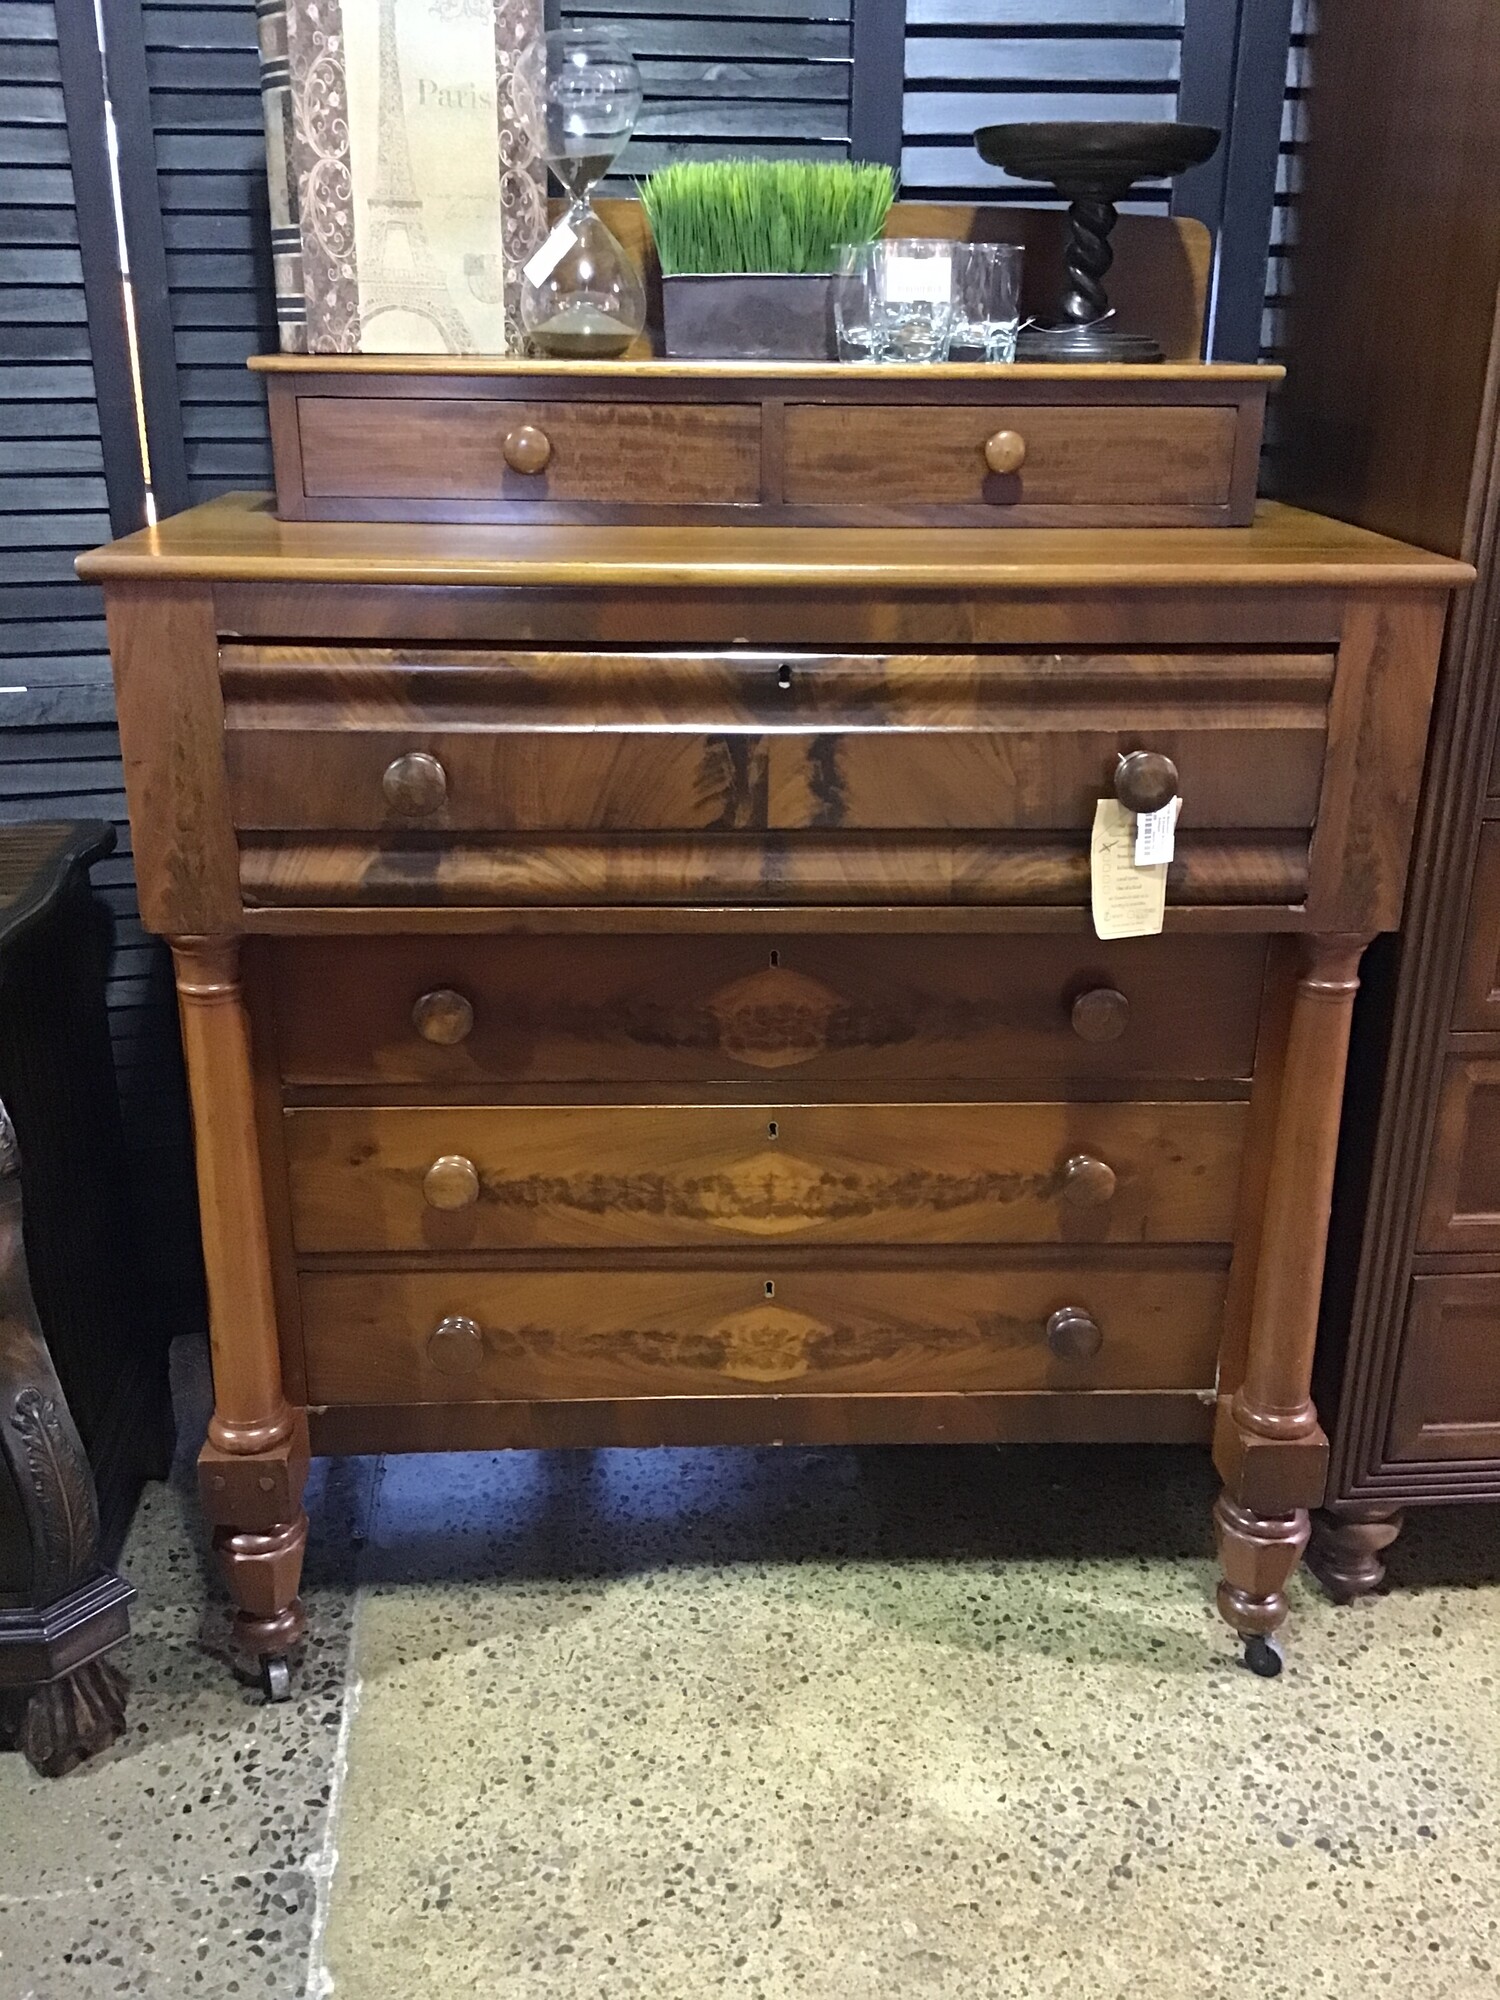 6 Drawer Empire Dresser
Beautiful Antique
Flame mahogany
2 small drawers
1 deep drawer
3 regular drawers
Front pillars Caster wheels

Dimensions: 44x24x56